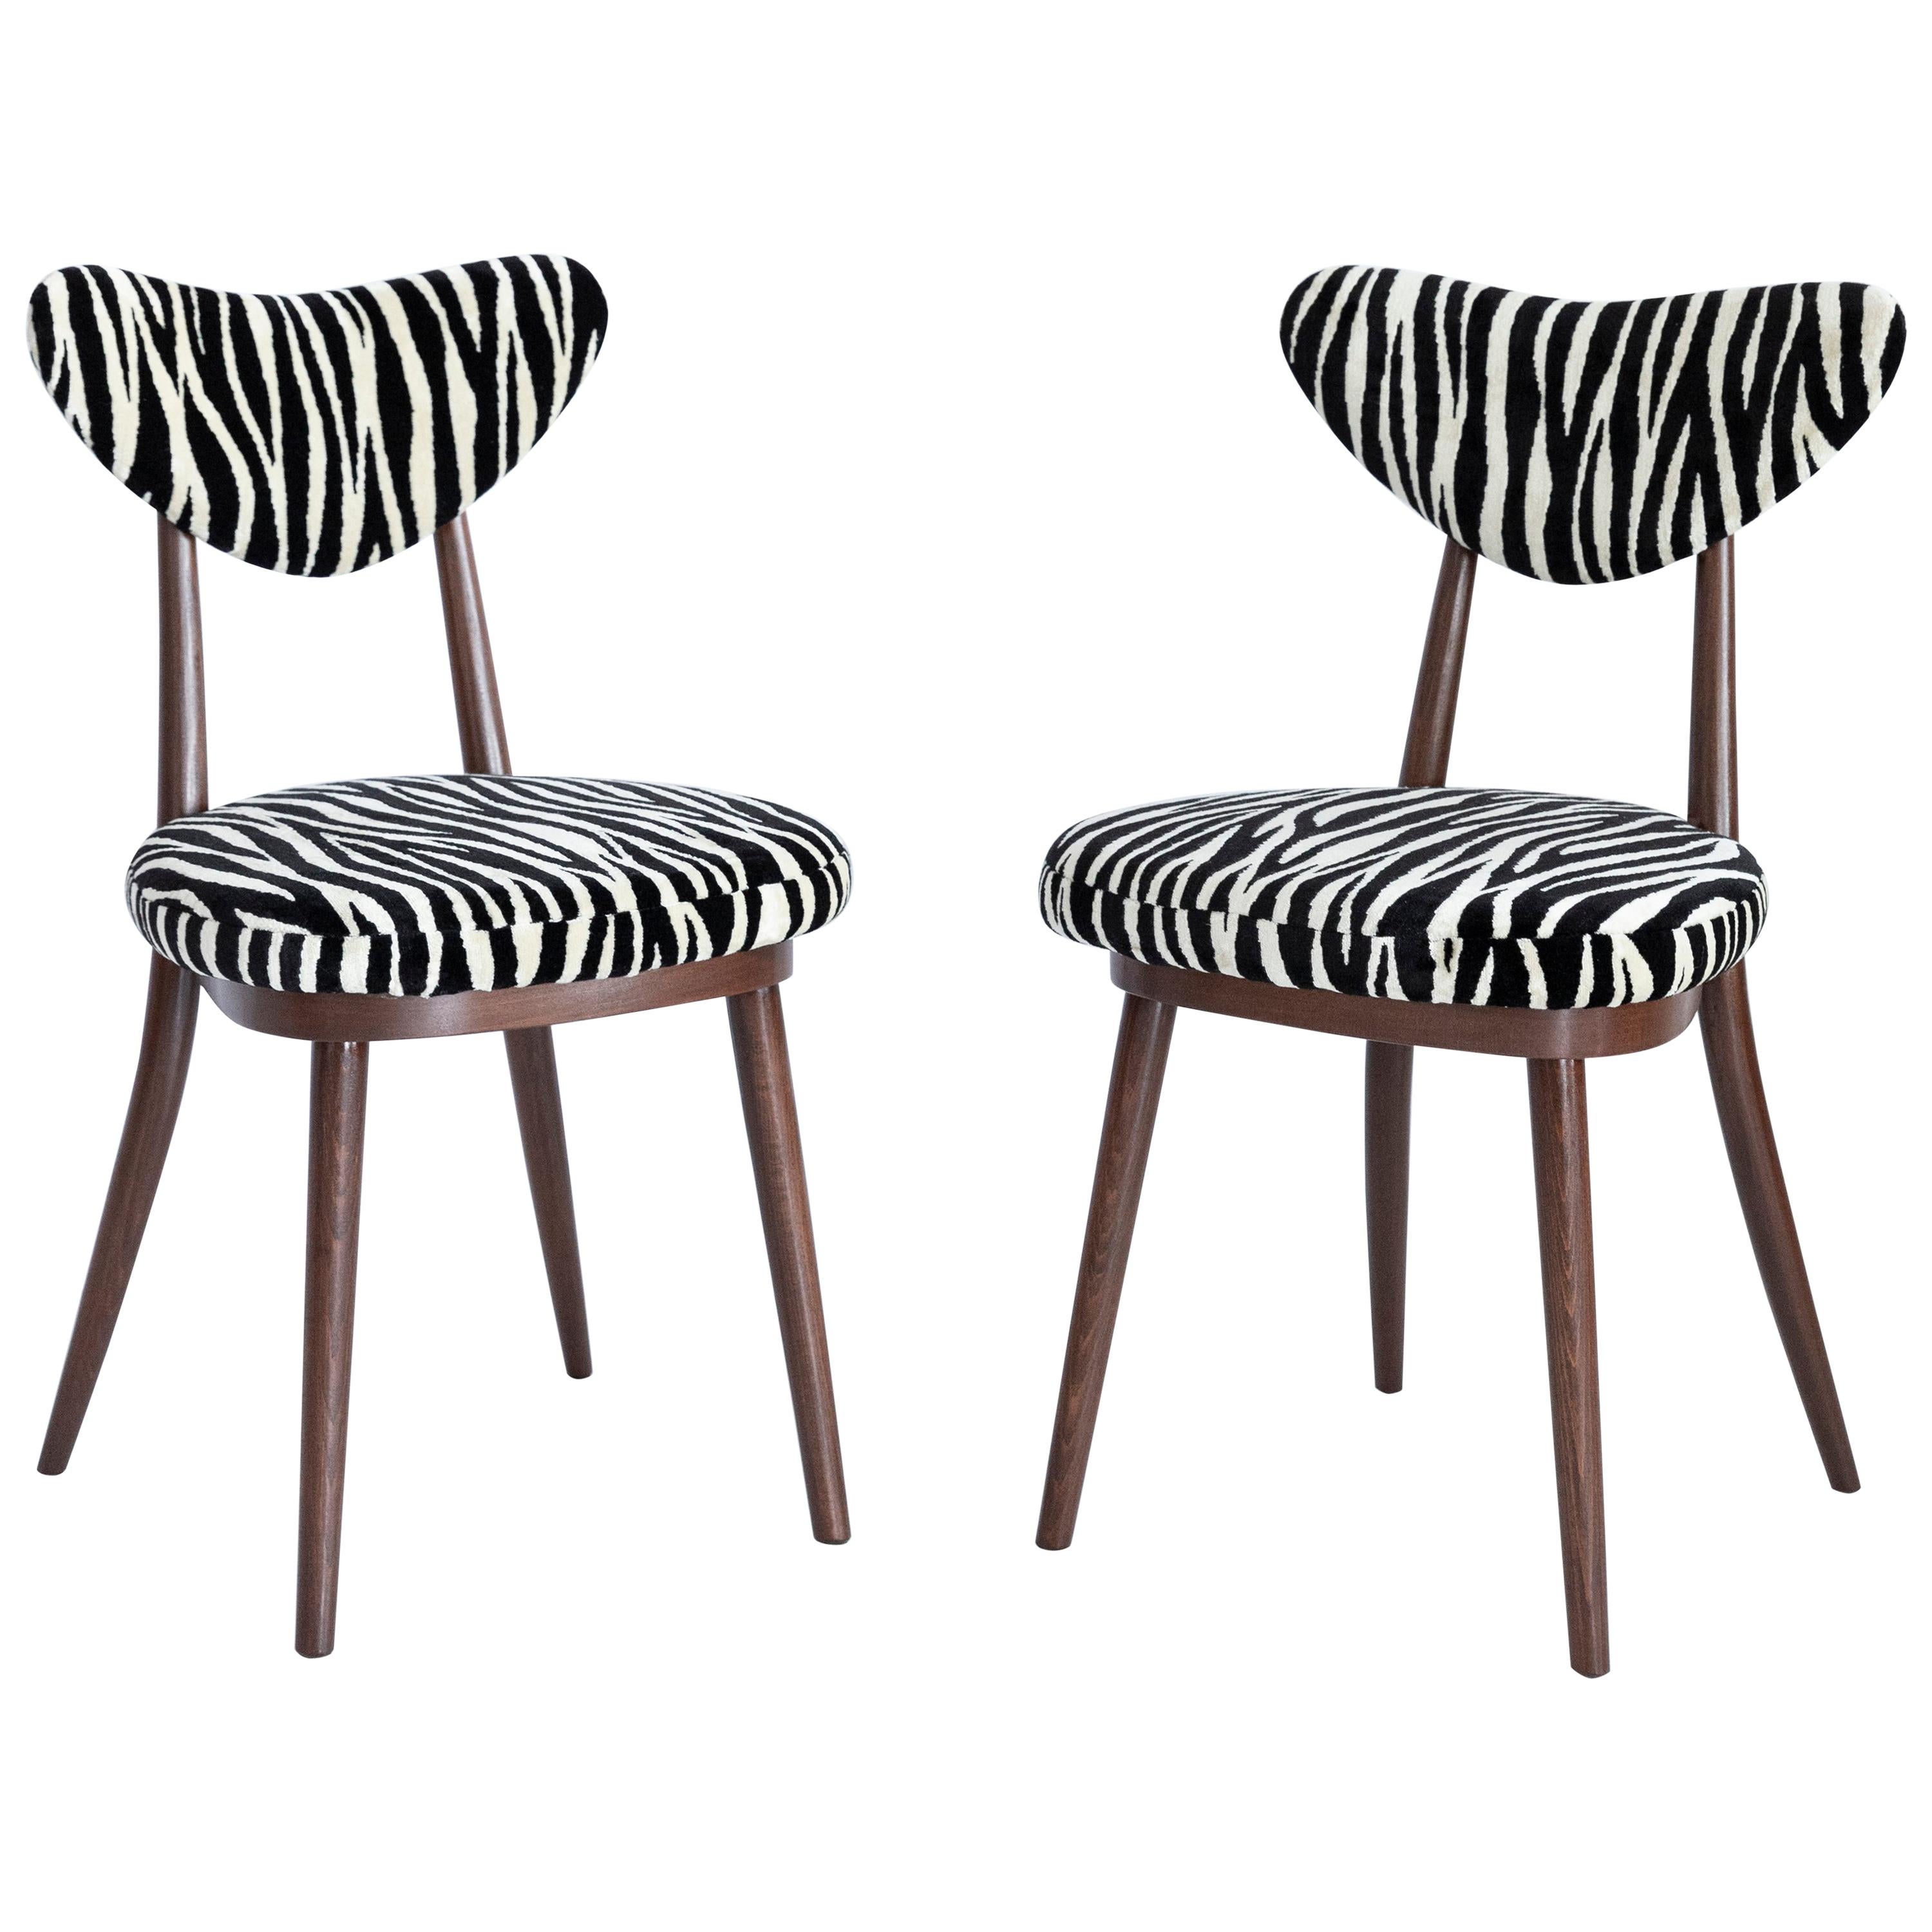 Set of Two Midcentury Zebra Black and White Heart Chairs, Poland, 1960s